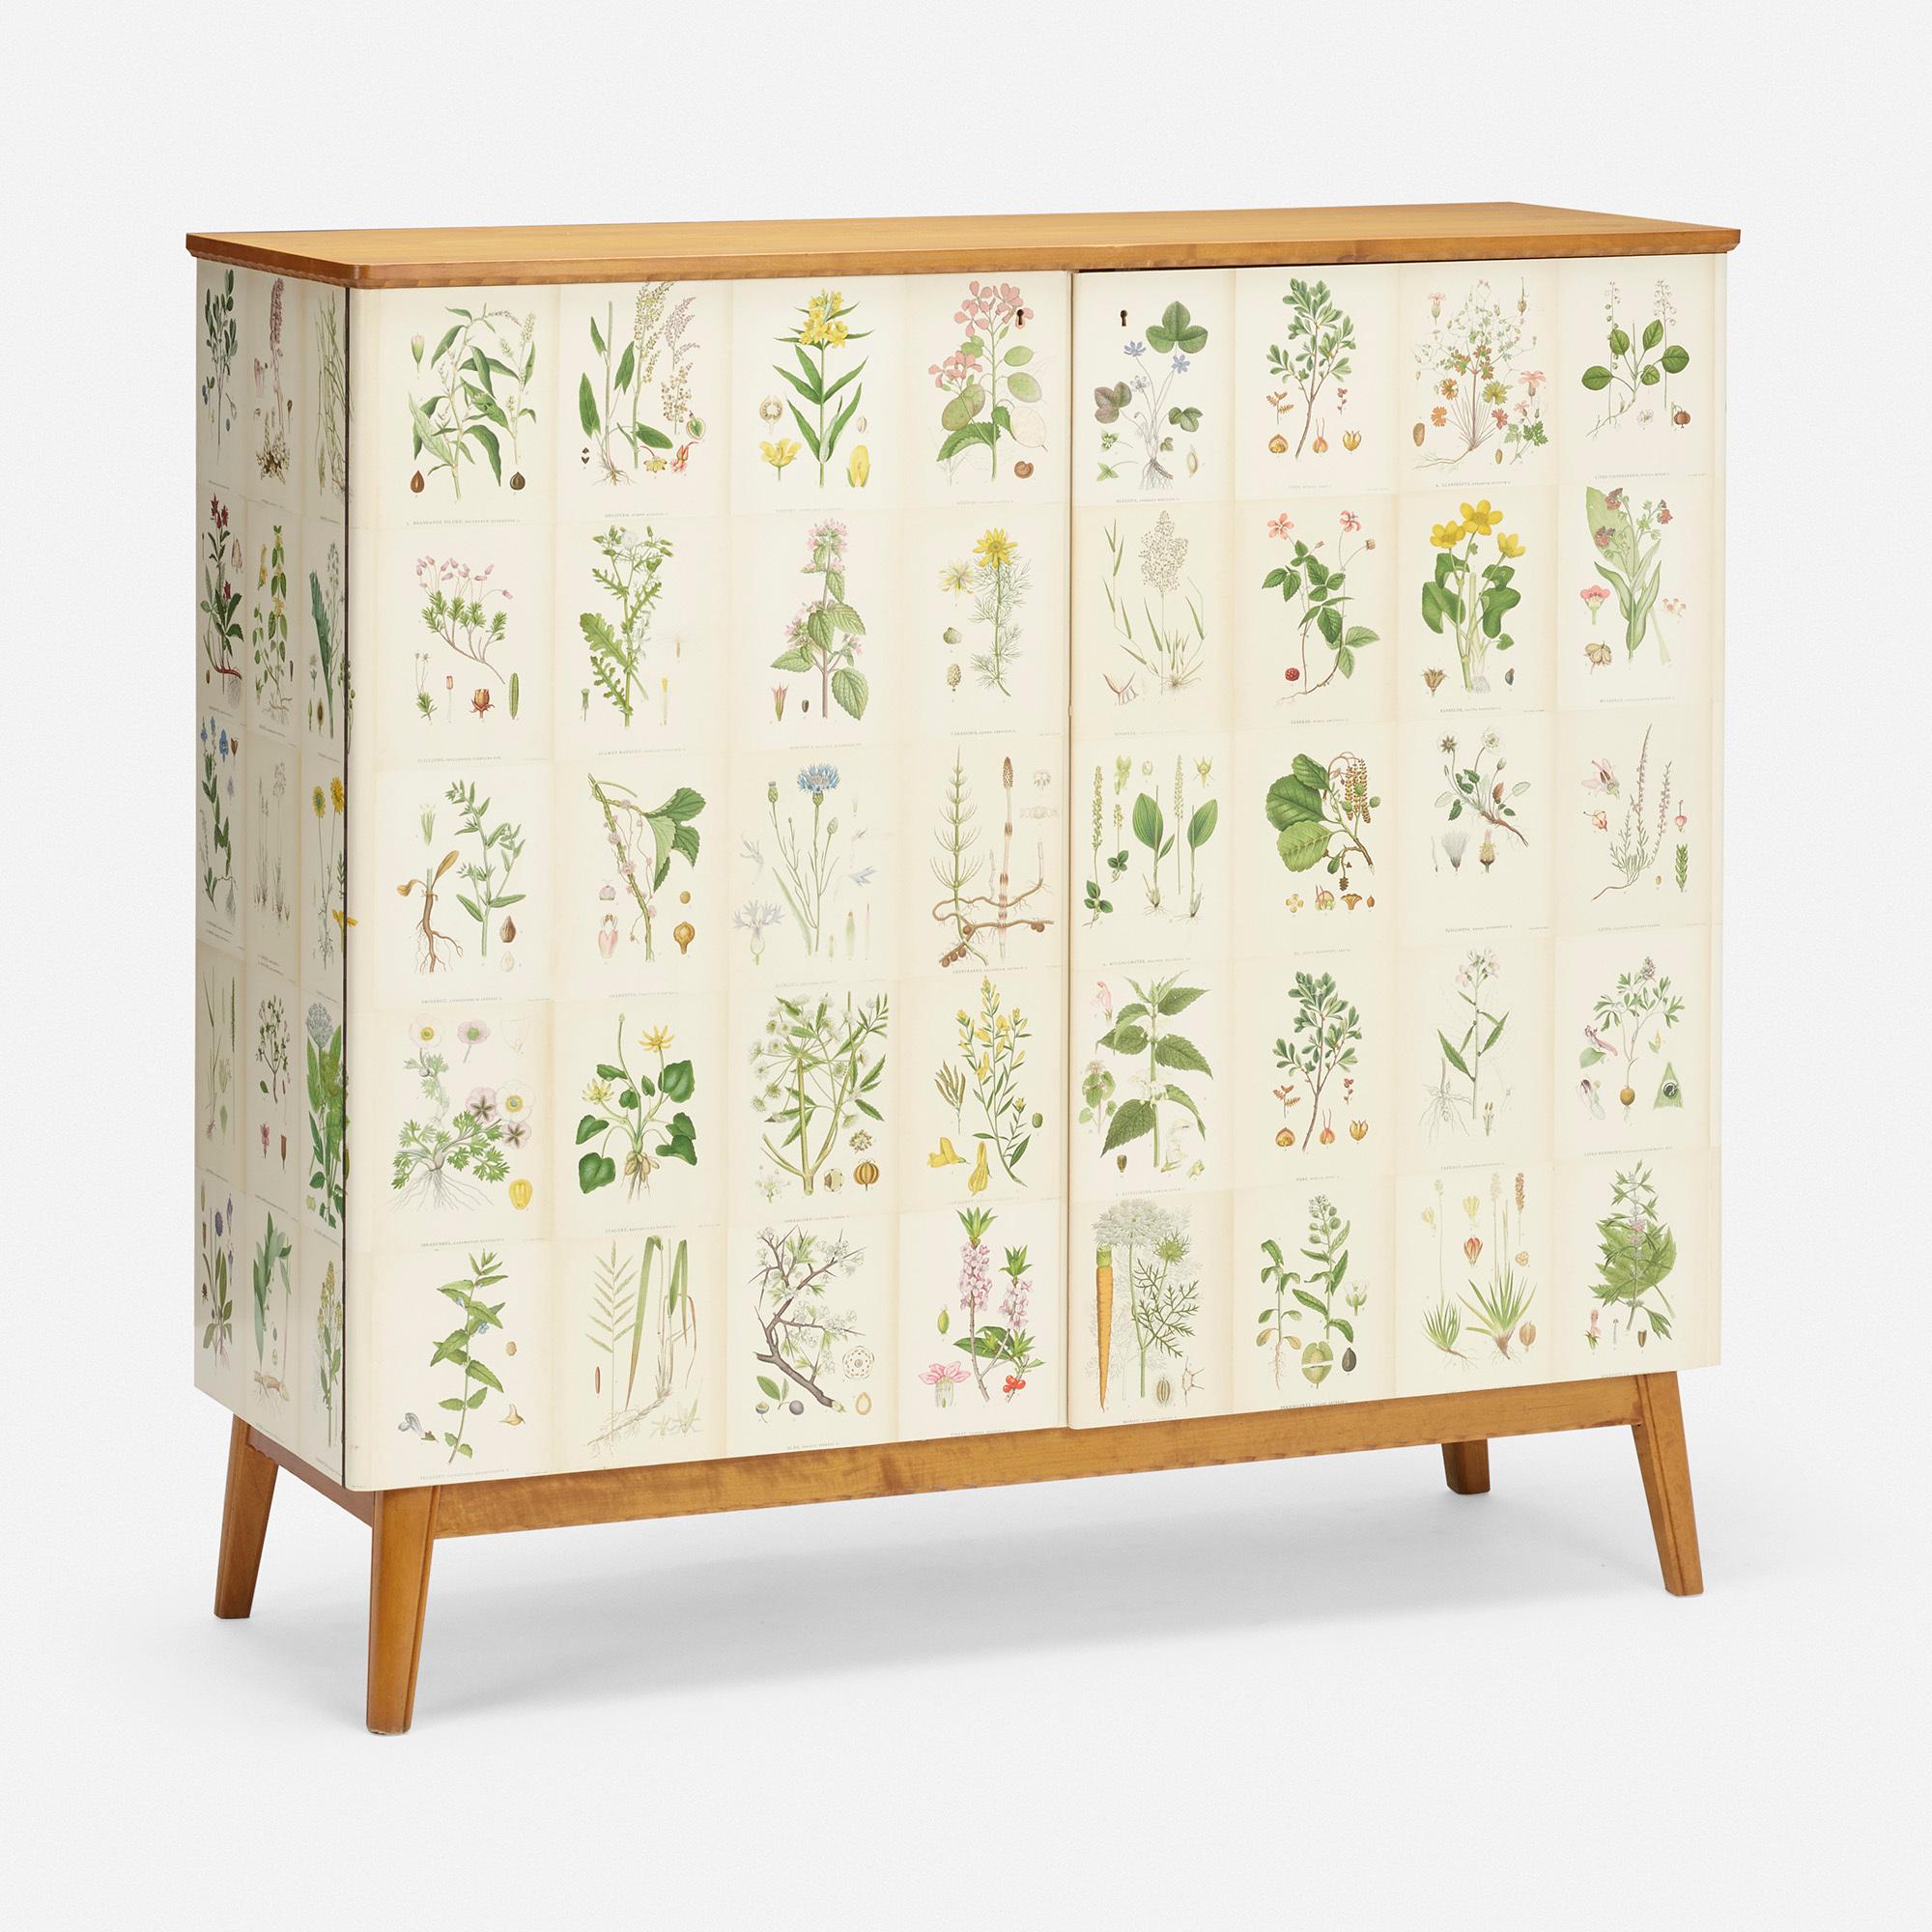 Scandinavian Nordens flora cabinet, circa 1945.

Cabinet features two locking doors concealing two drawers, four removable shelves, and storage. Cabinet retains key.

Additional information:
Material: birch, applied offset lithograph
Size: 49